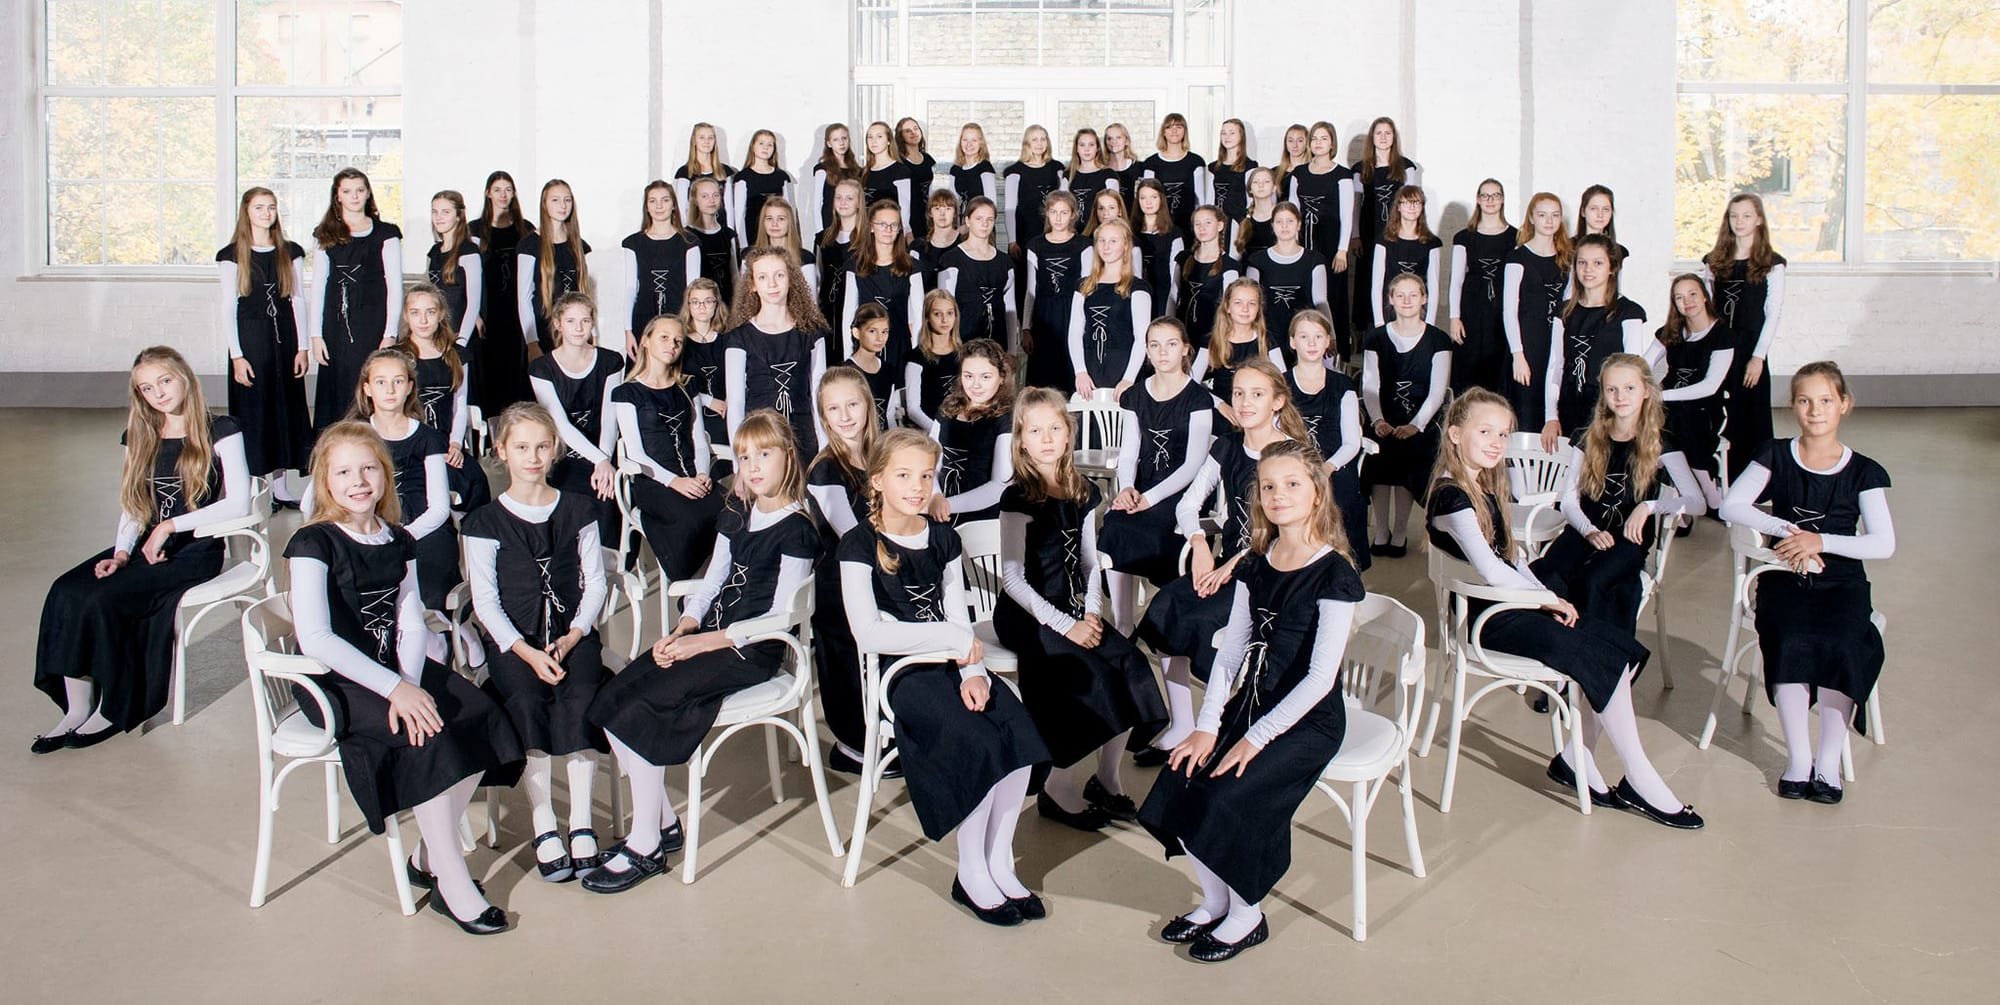 ISCM Latvia Announced The Results Of International Girls’ Choir Composition Competition